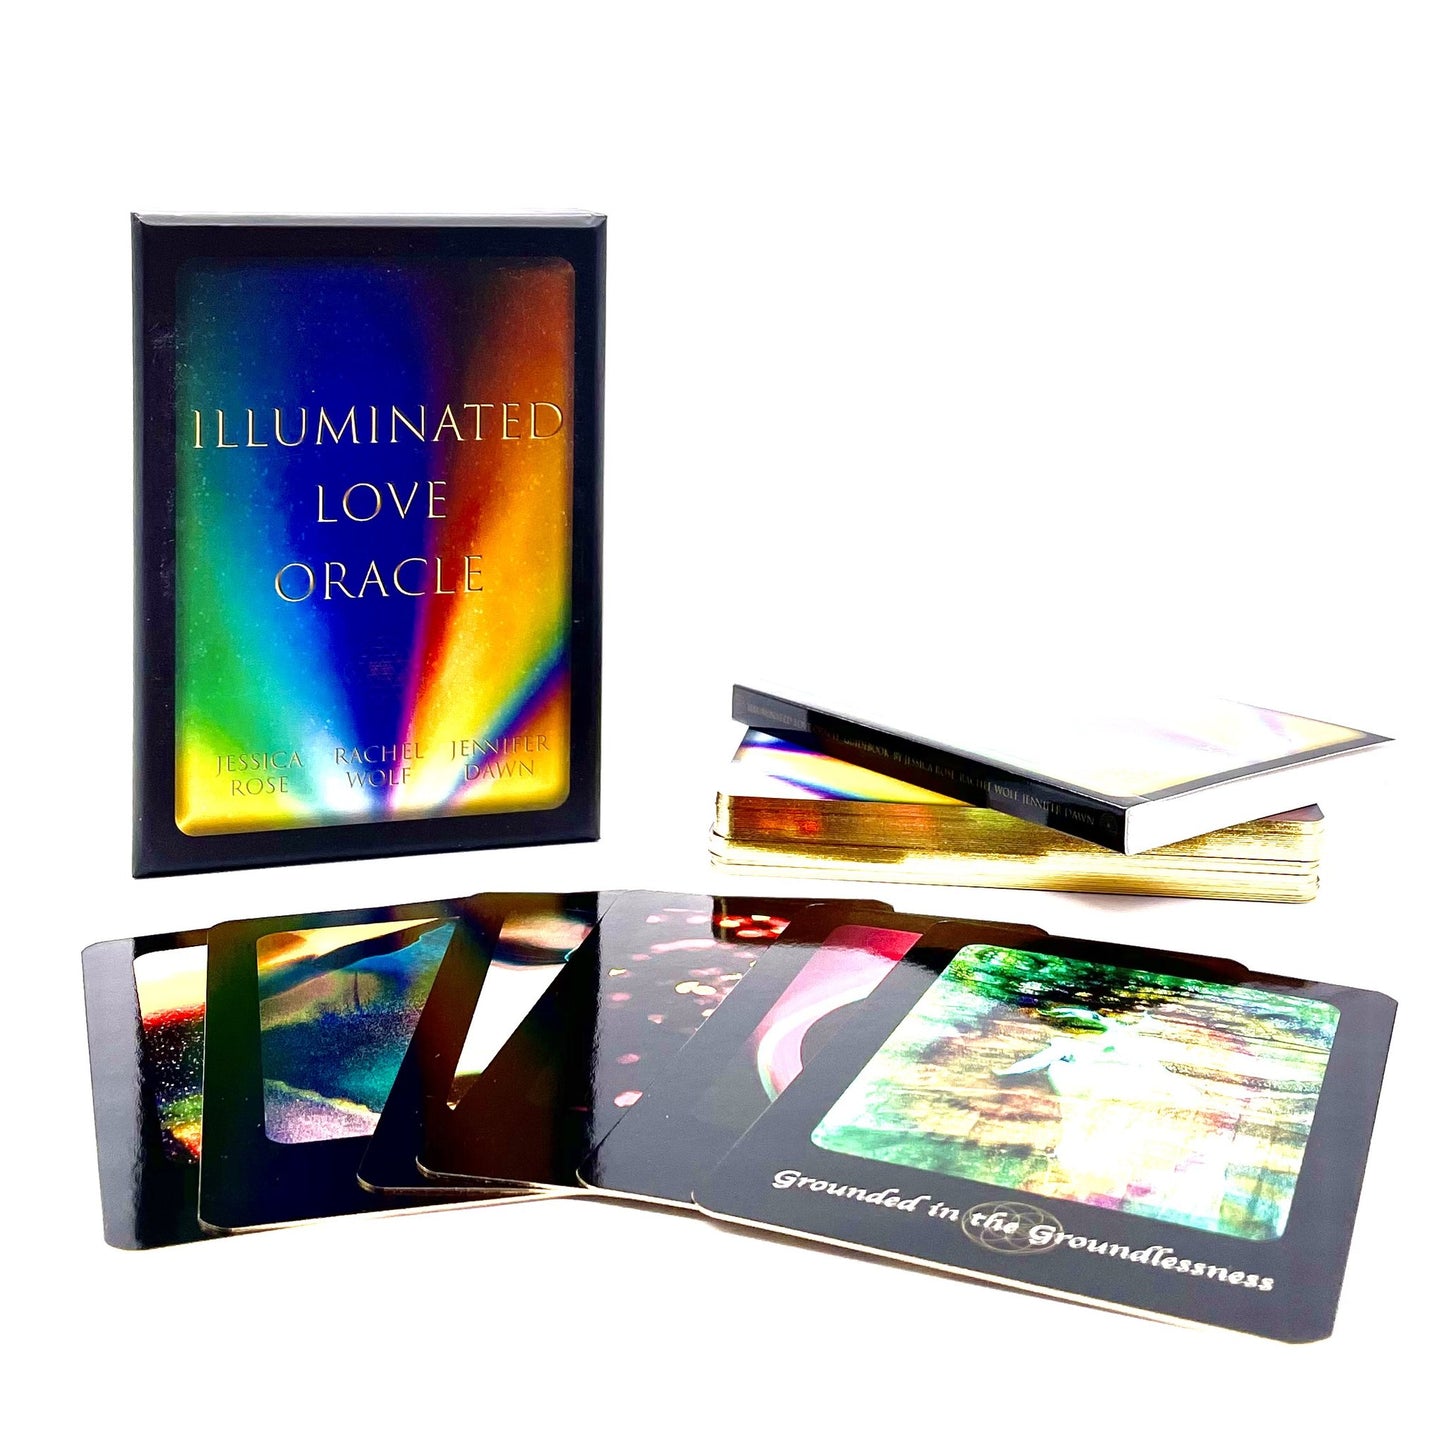 Box cover art of the Illuminated Love Oracle deck with collection of cards booklet.